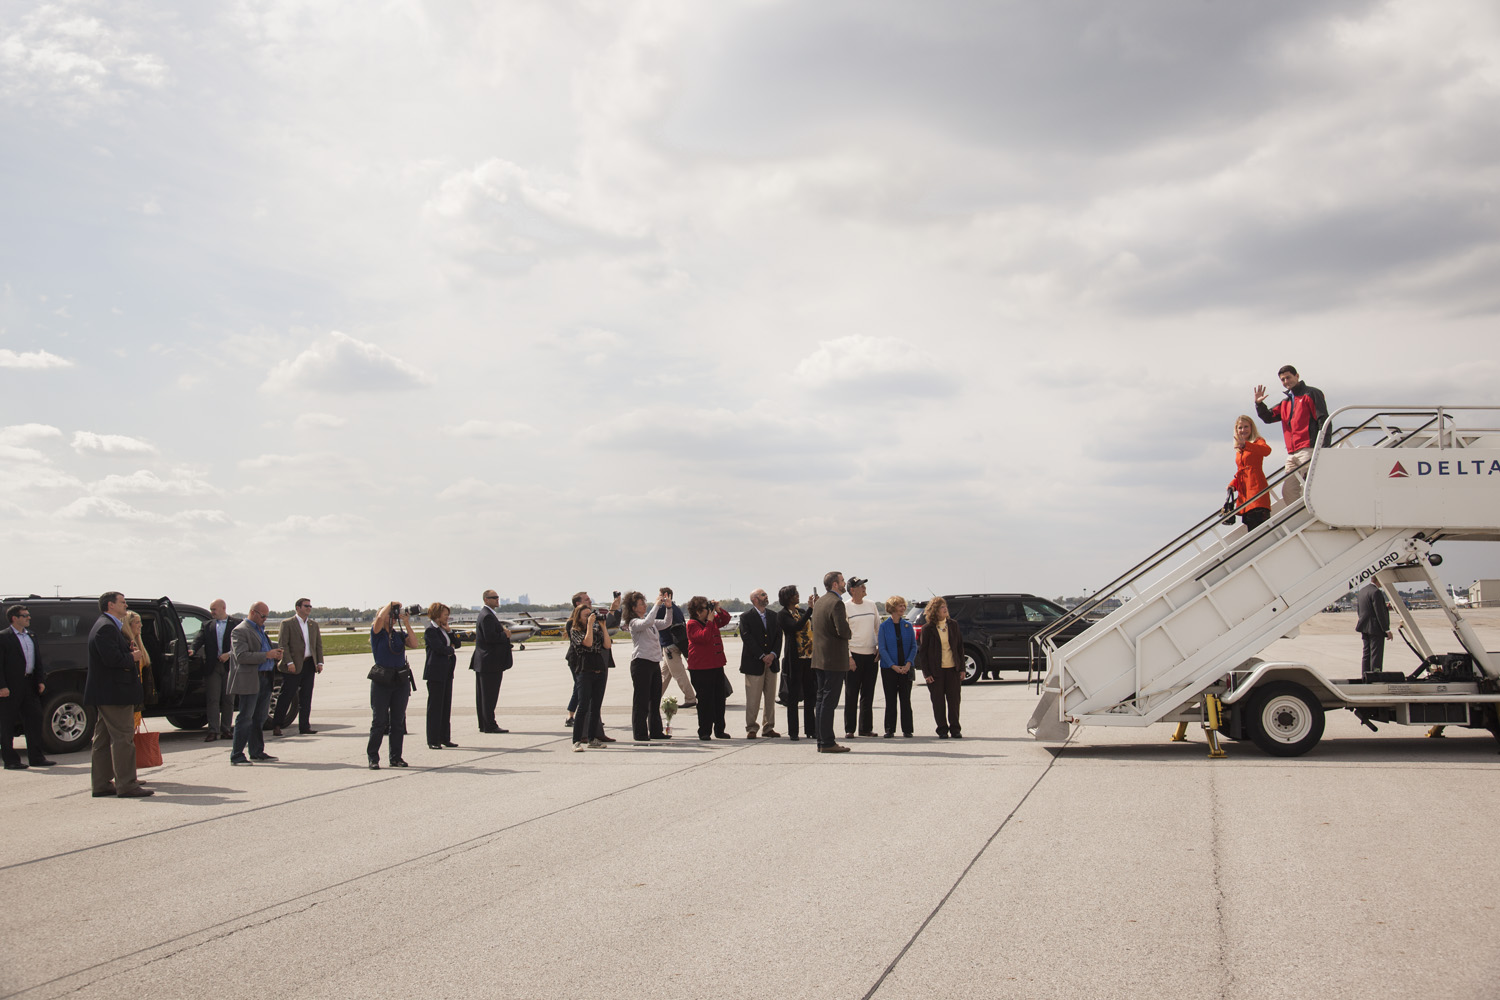 Image:Paul Ryan and his wife exit their plane in Colombus, Ohio. Sept. 29, 2012.